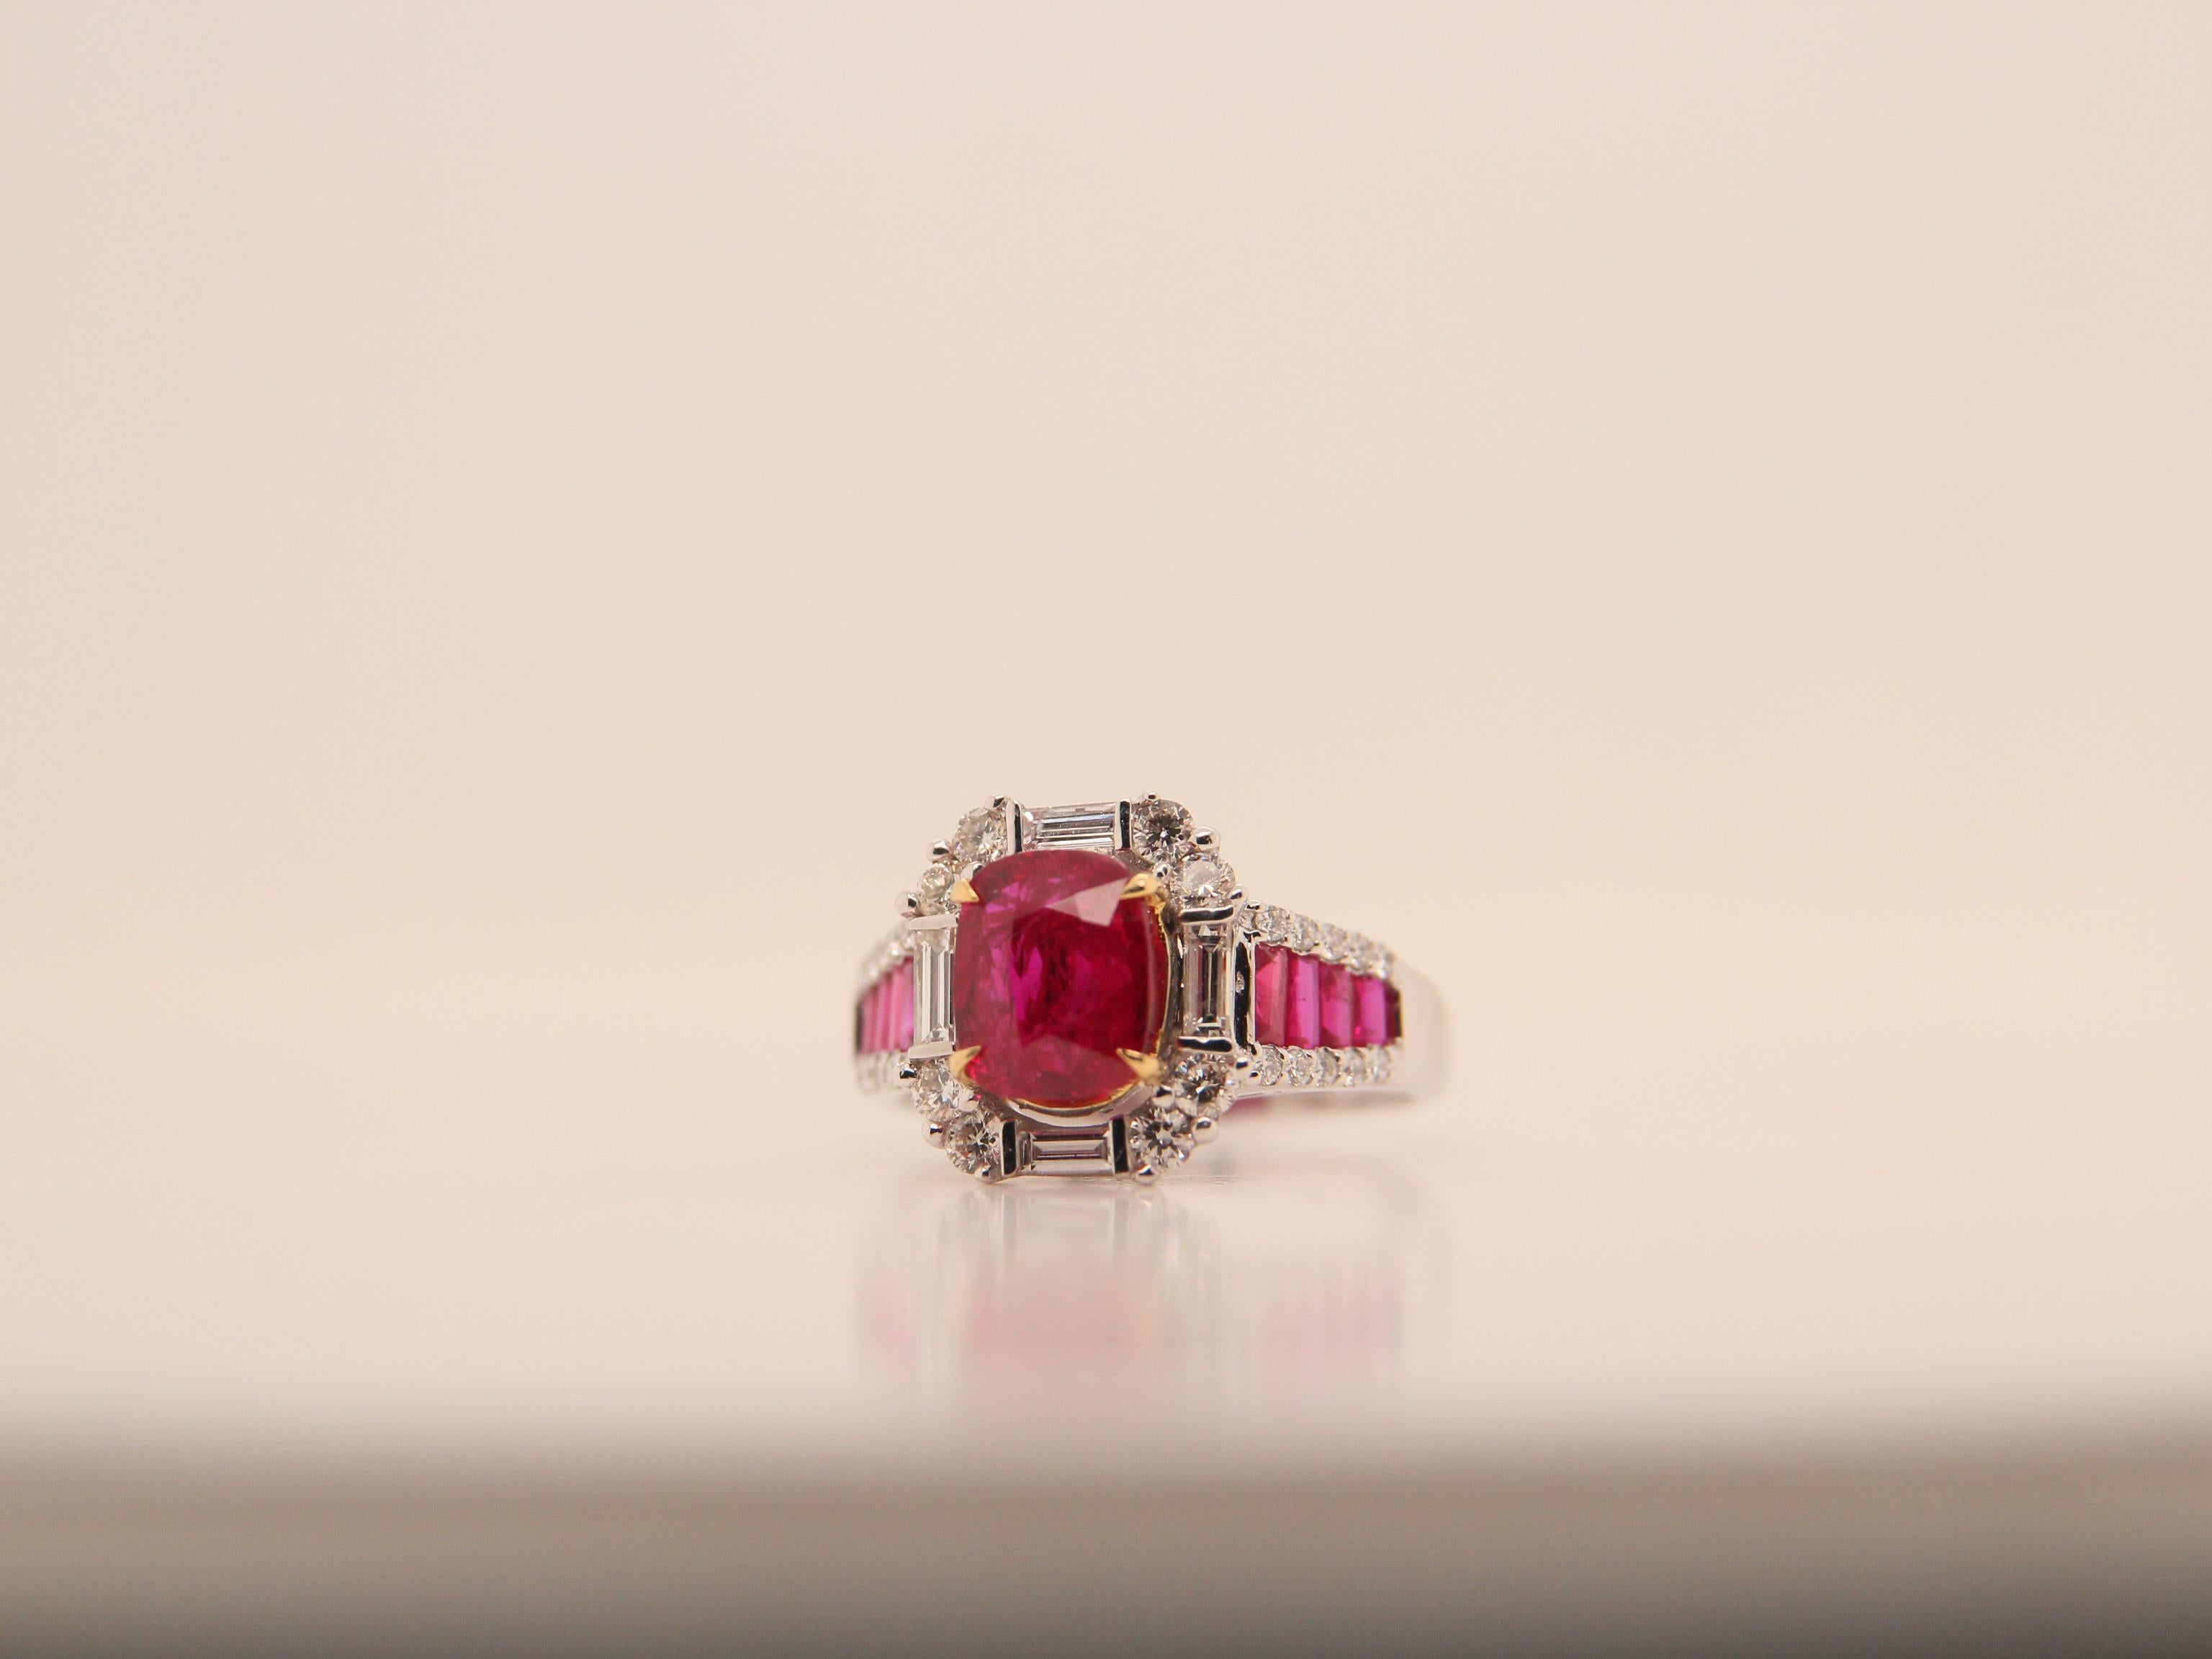 A brand new ruby ring by REWA. The ring's center stone is 2.06 carat Burmese ruby certified by Gem Research Swisslab (GRS) as natural, unheated, 'Pigeon blood'. The stone was unearthed from Mogok, Burma - one of the oldest ruby mines in the world.